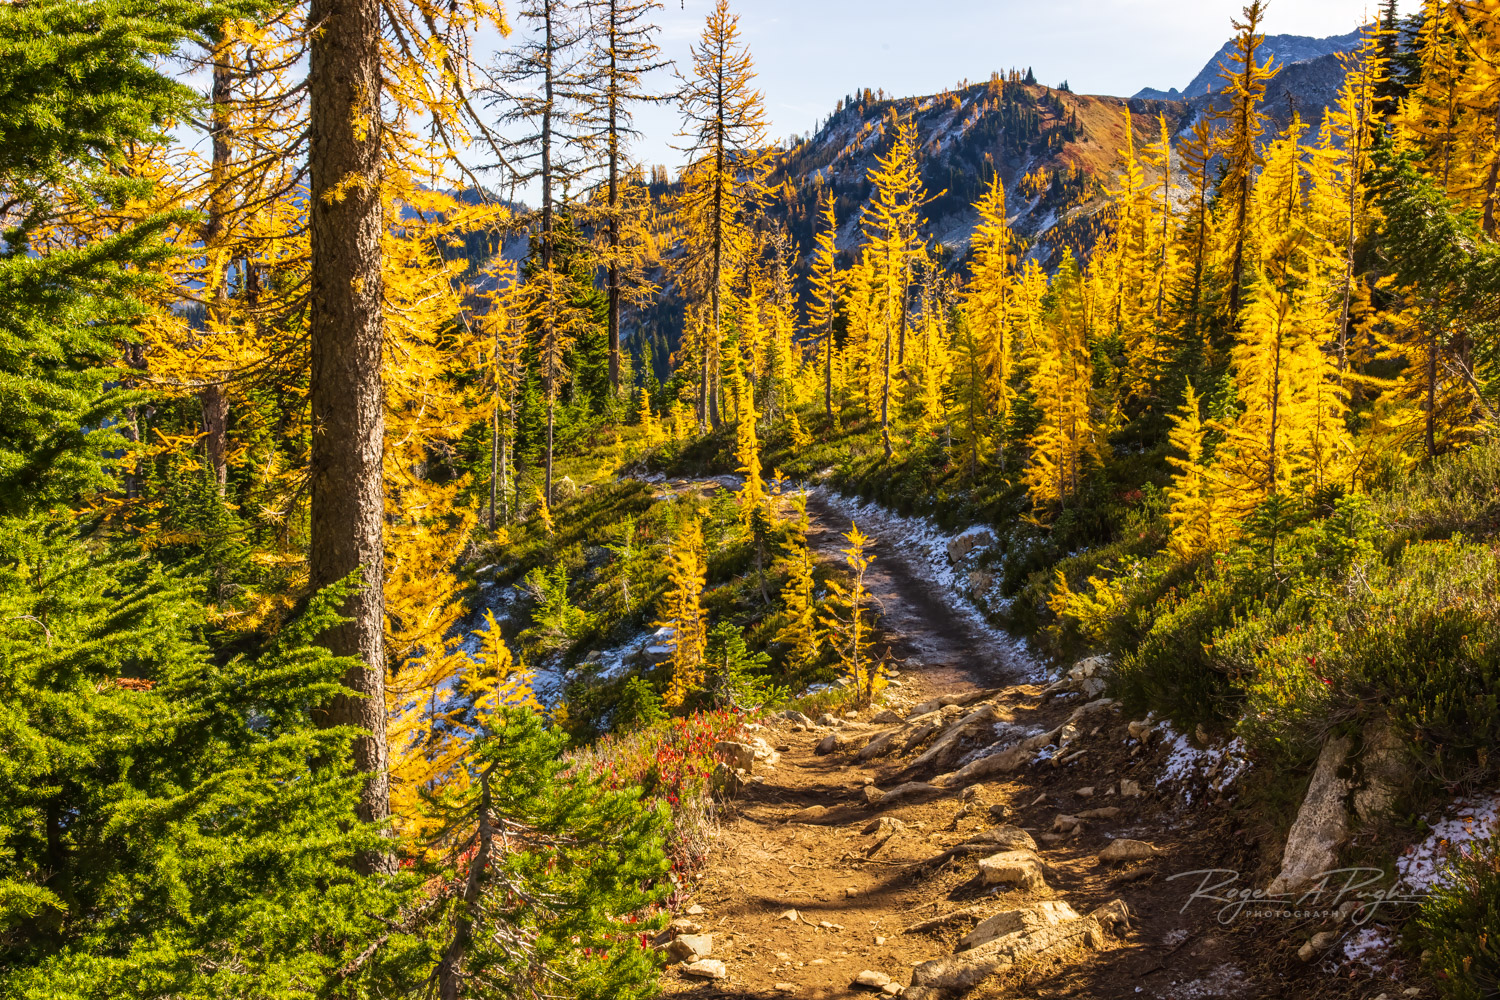 A great spot on the trail lined by the fiery larch trees.